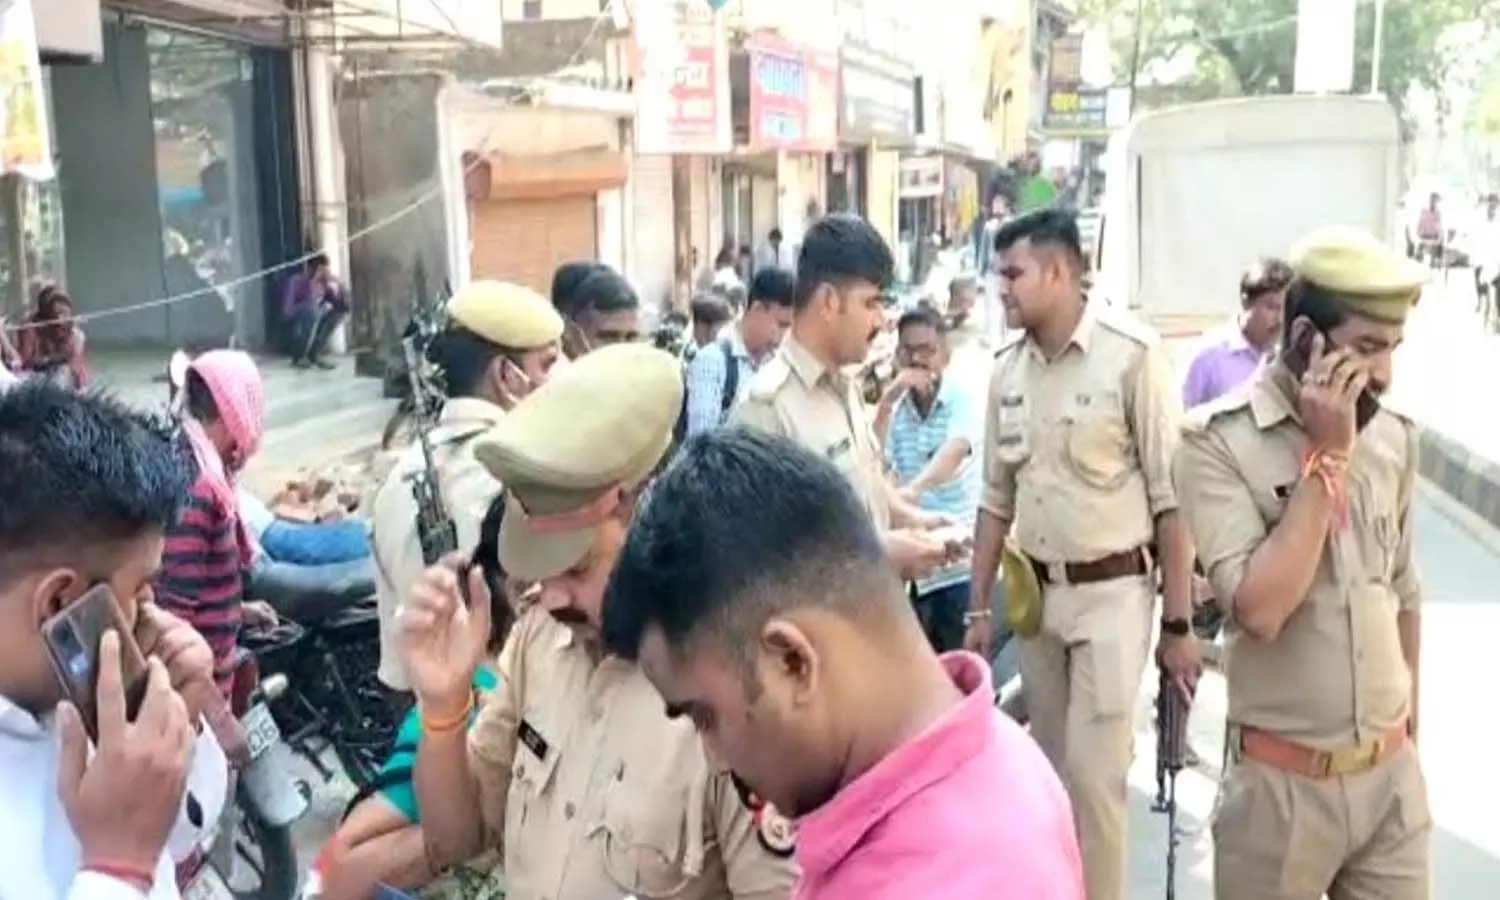 Sitapur Crime News: Miscreants looted cash from a person posing as a CRPF officer, stirred up the city